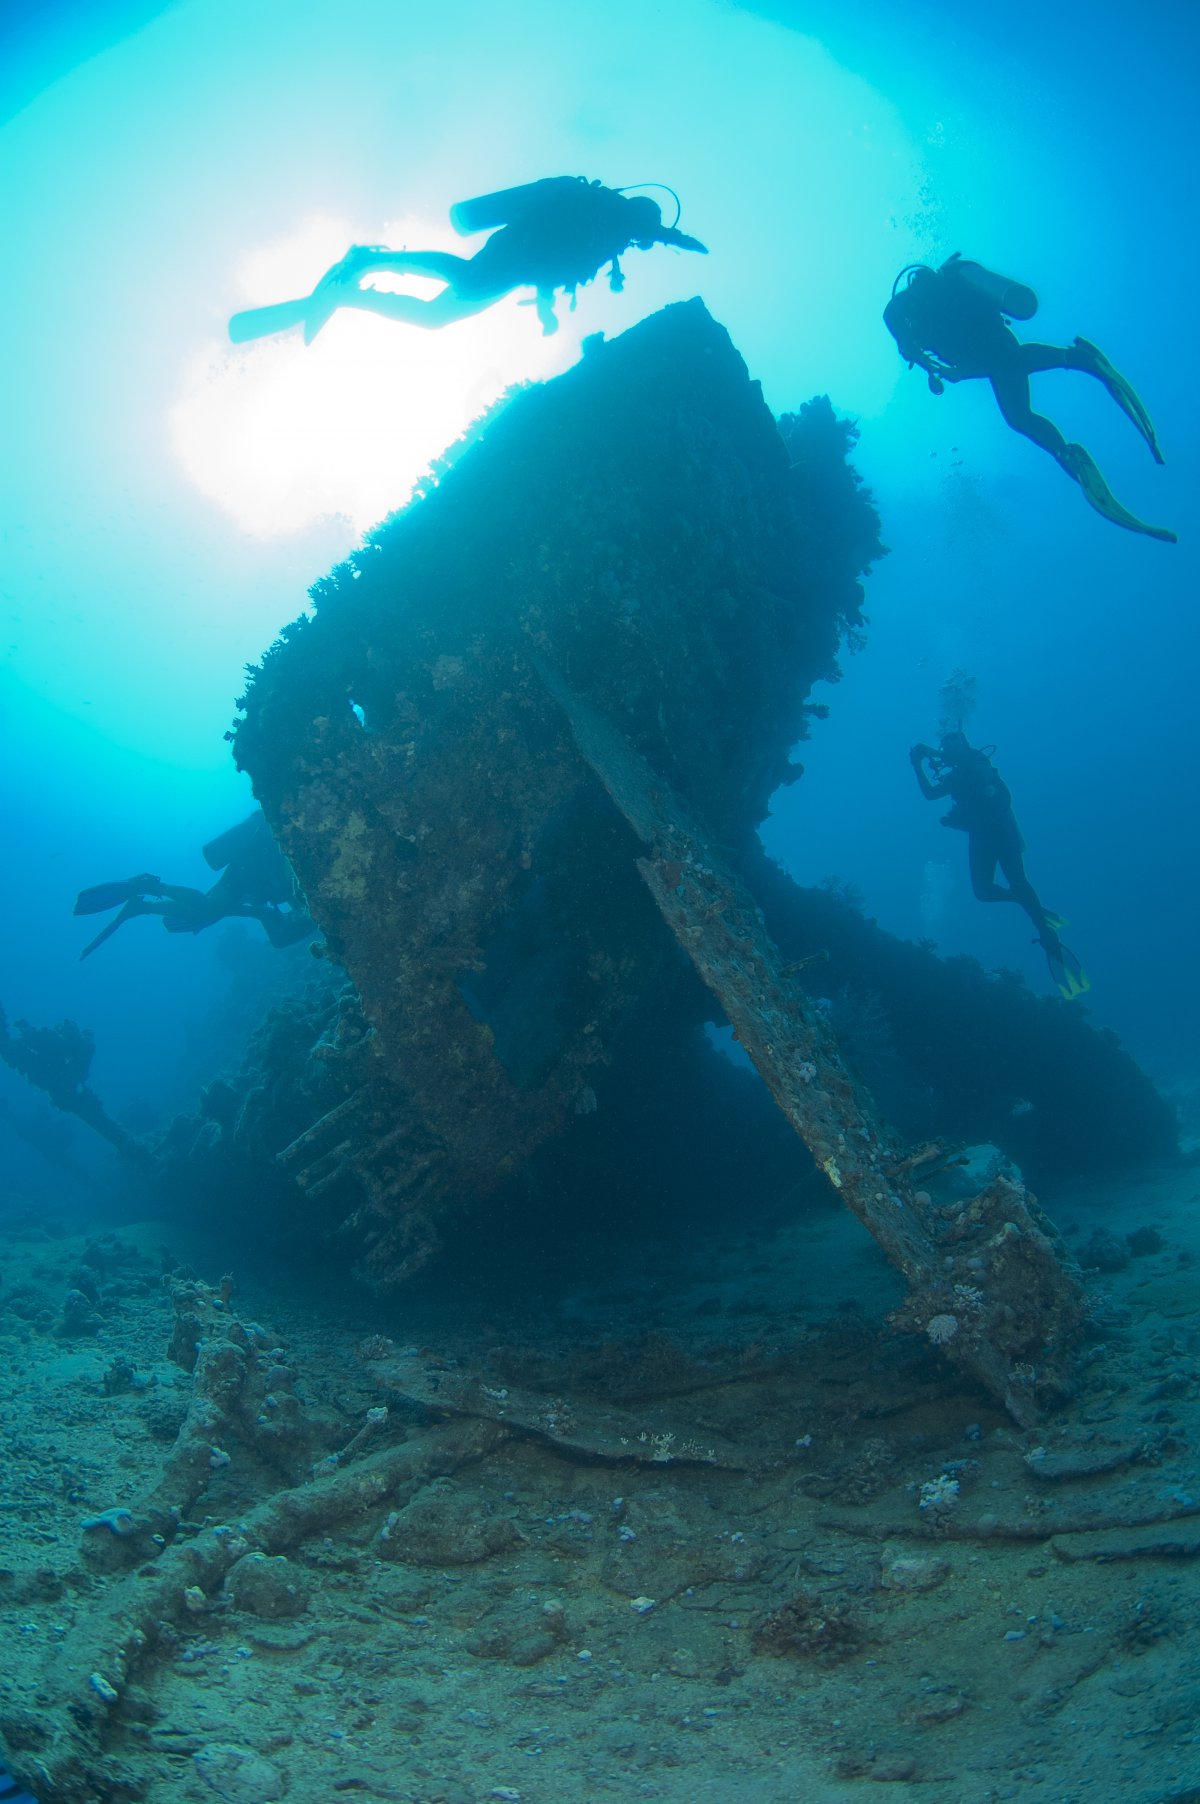 Scenery pictures of shipwrecks on the seabed